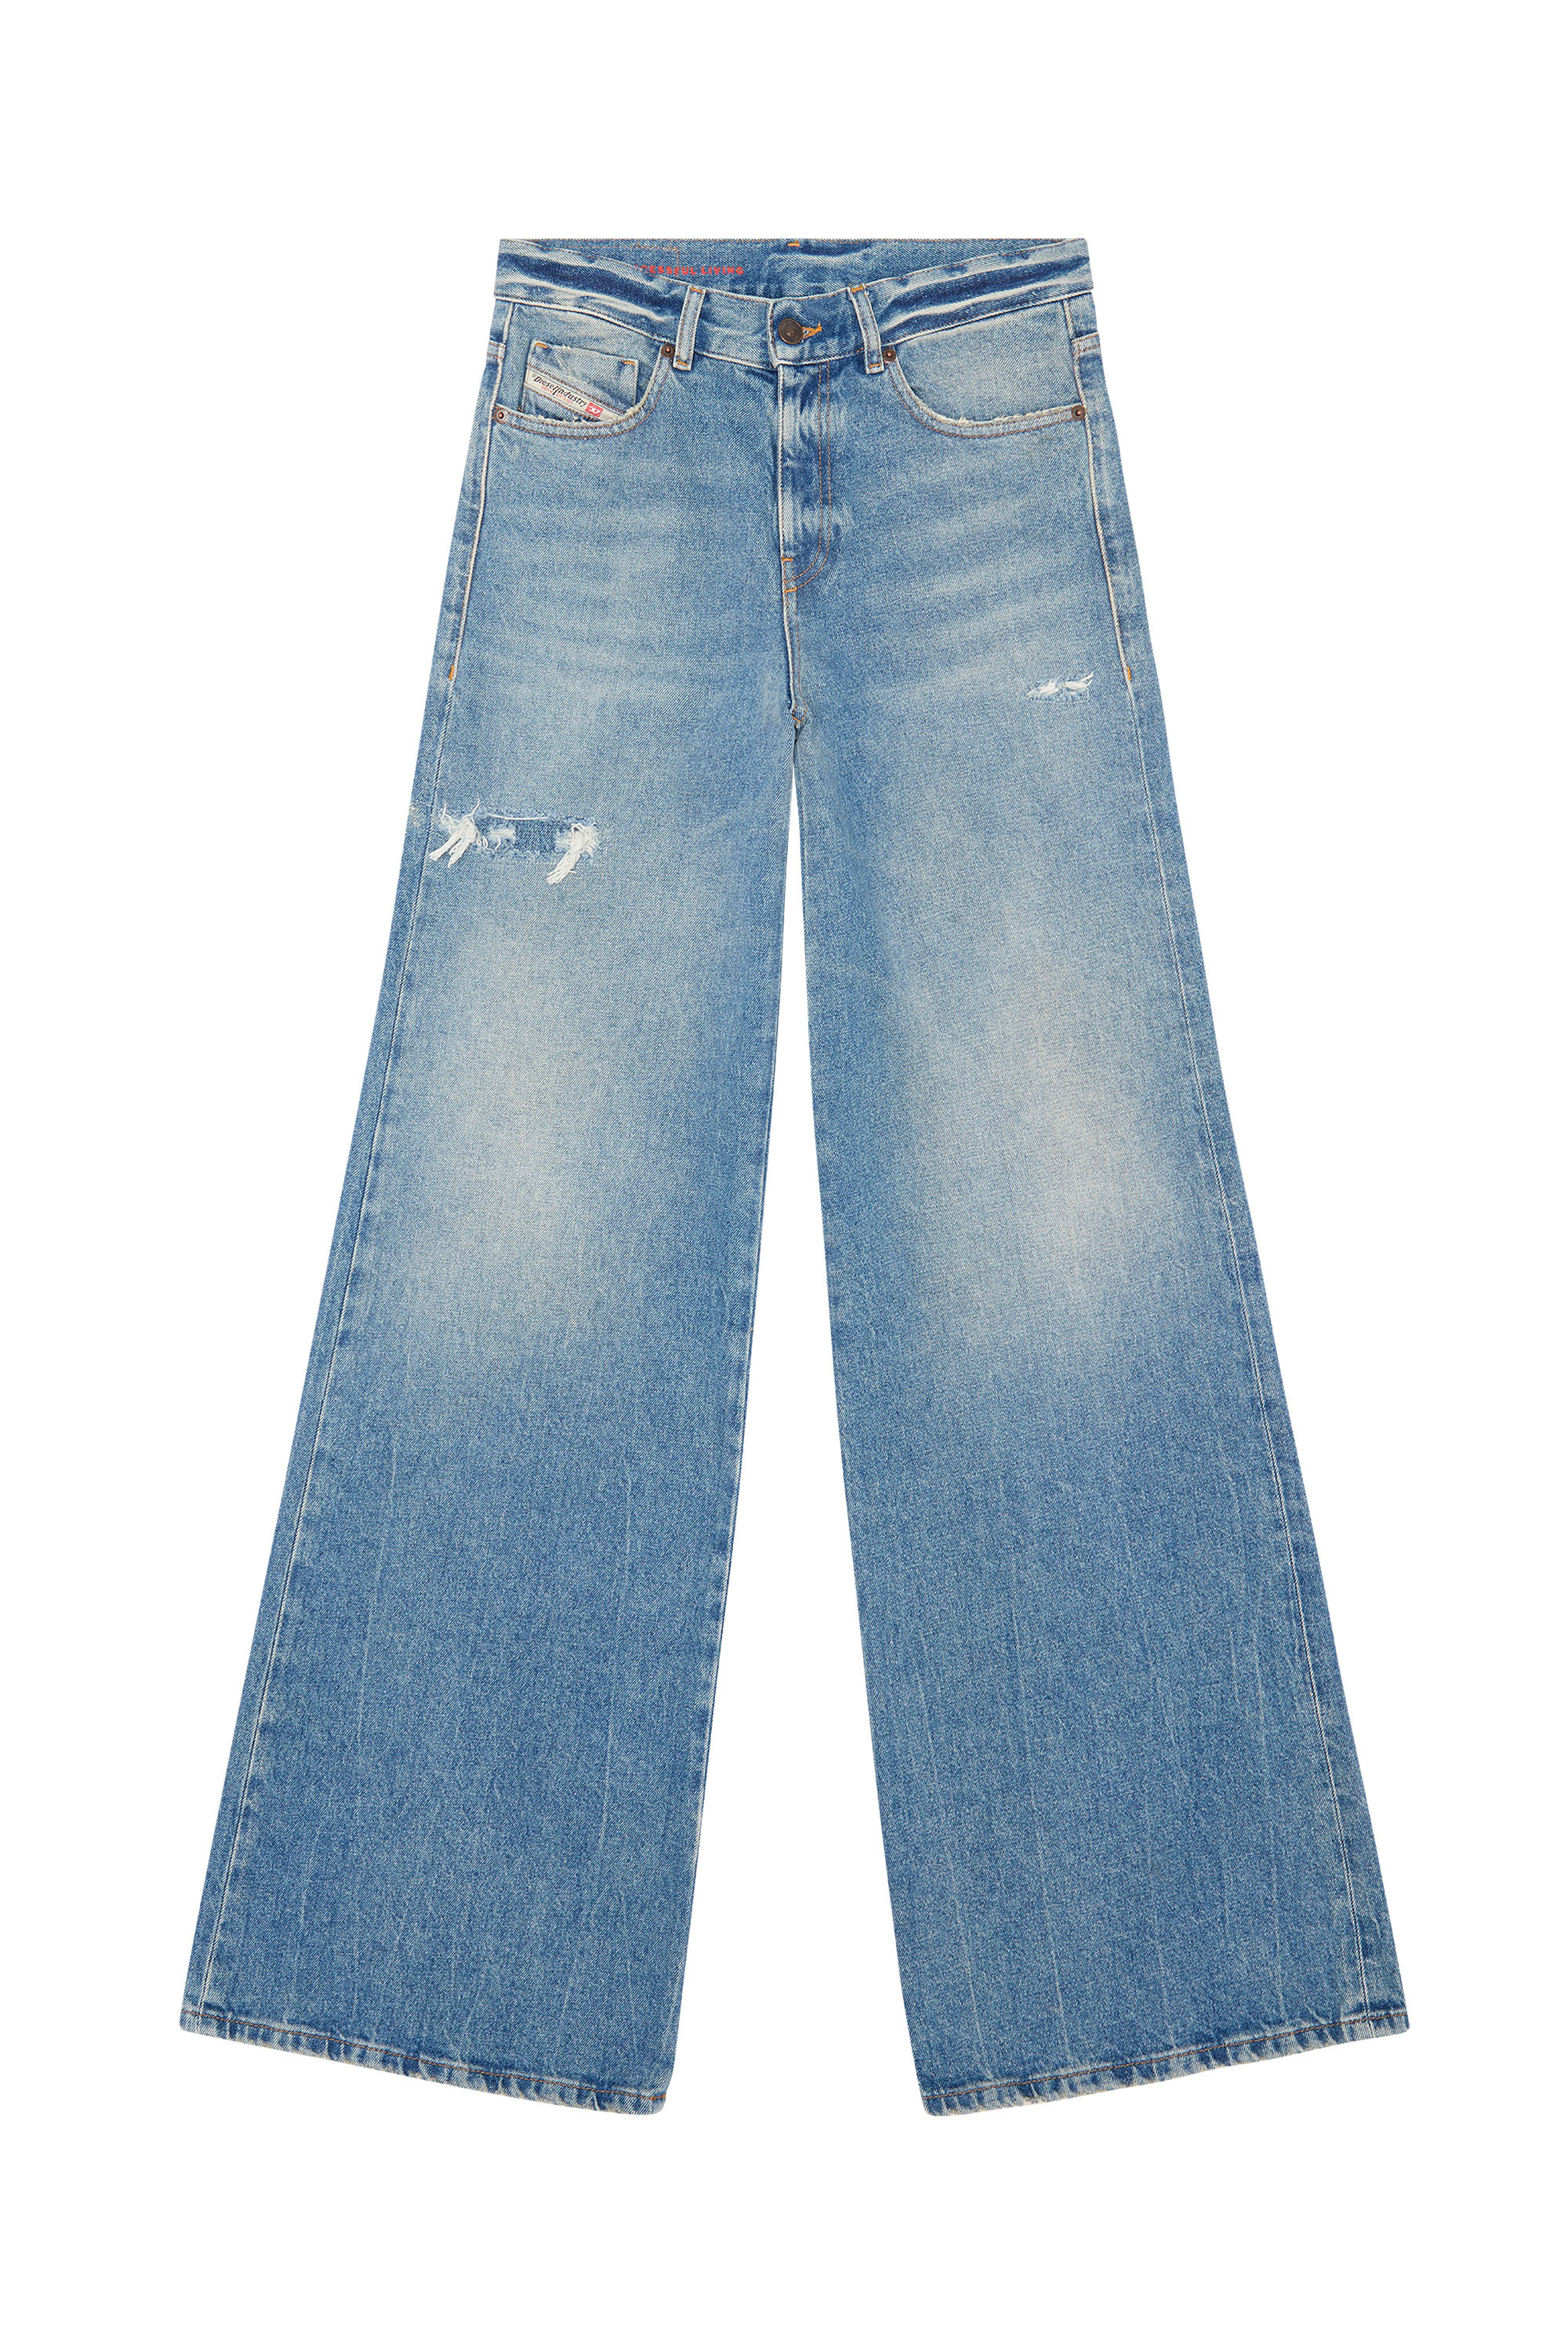 1978 09D97 Bootcut and Flare Jeans, Mittelblau - Jeans